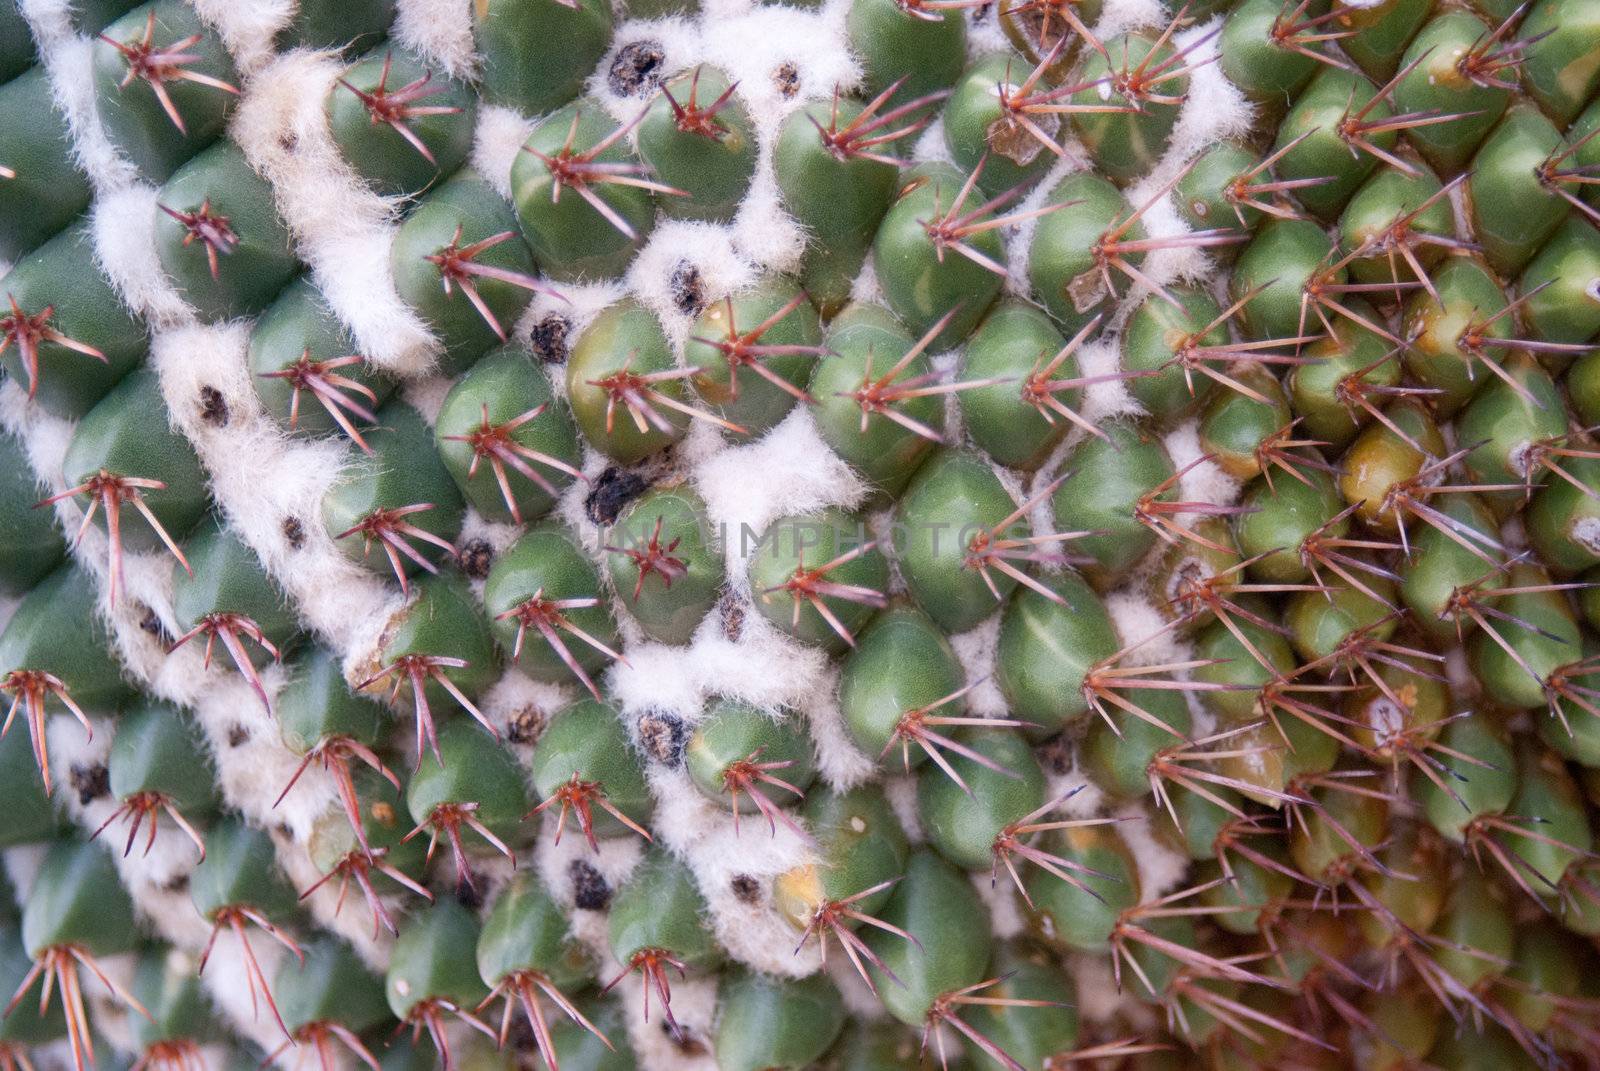 The prickley thorns from a green cactus can be seen up-close in detail.